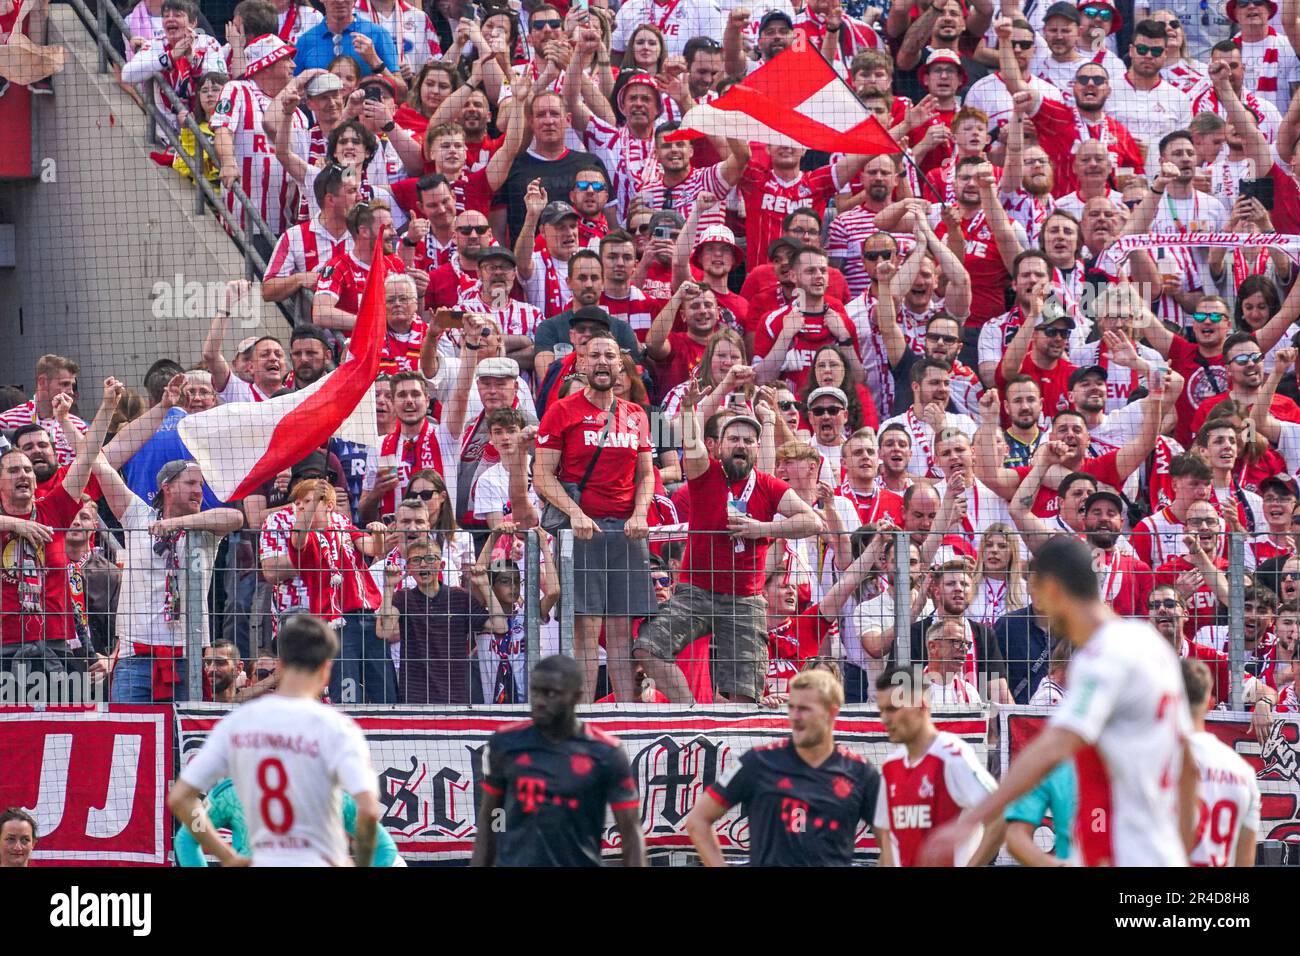 COLOGNE, GERMANY - MAY 27: 1. FC Koln fans during the Bundesliga match between 1. FC Koln and FC Bayern Munchen at the RheinEnergieStadion on May 27, 2023 in Cologne, Germany (Photo by Rene Nijhuis/Orange Pictures) Credit: Orange Pics BV/Alamy Live News Stock Photo